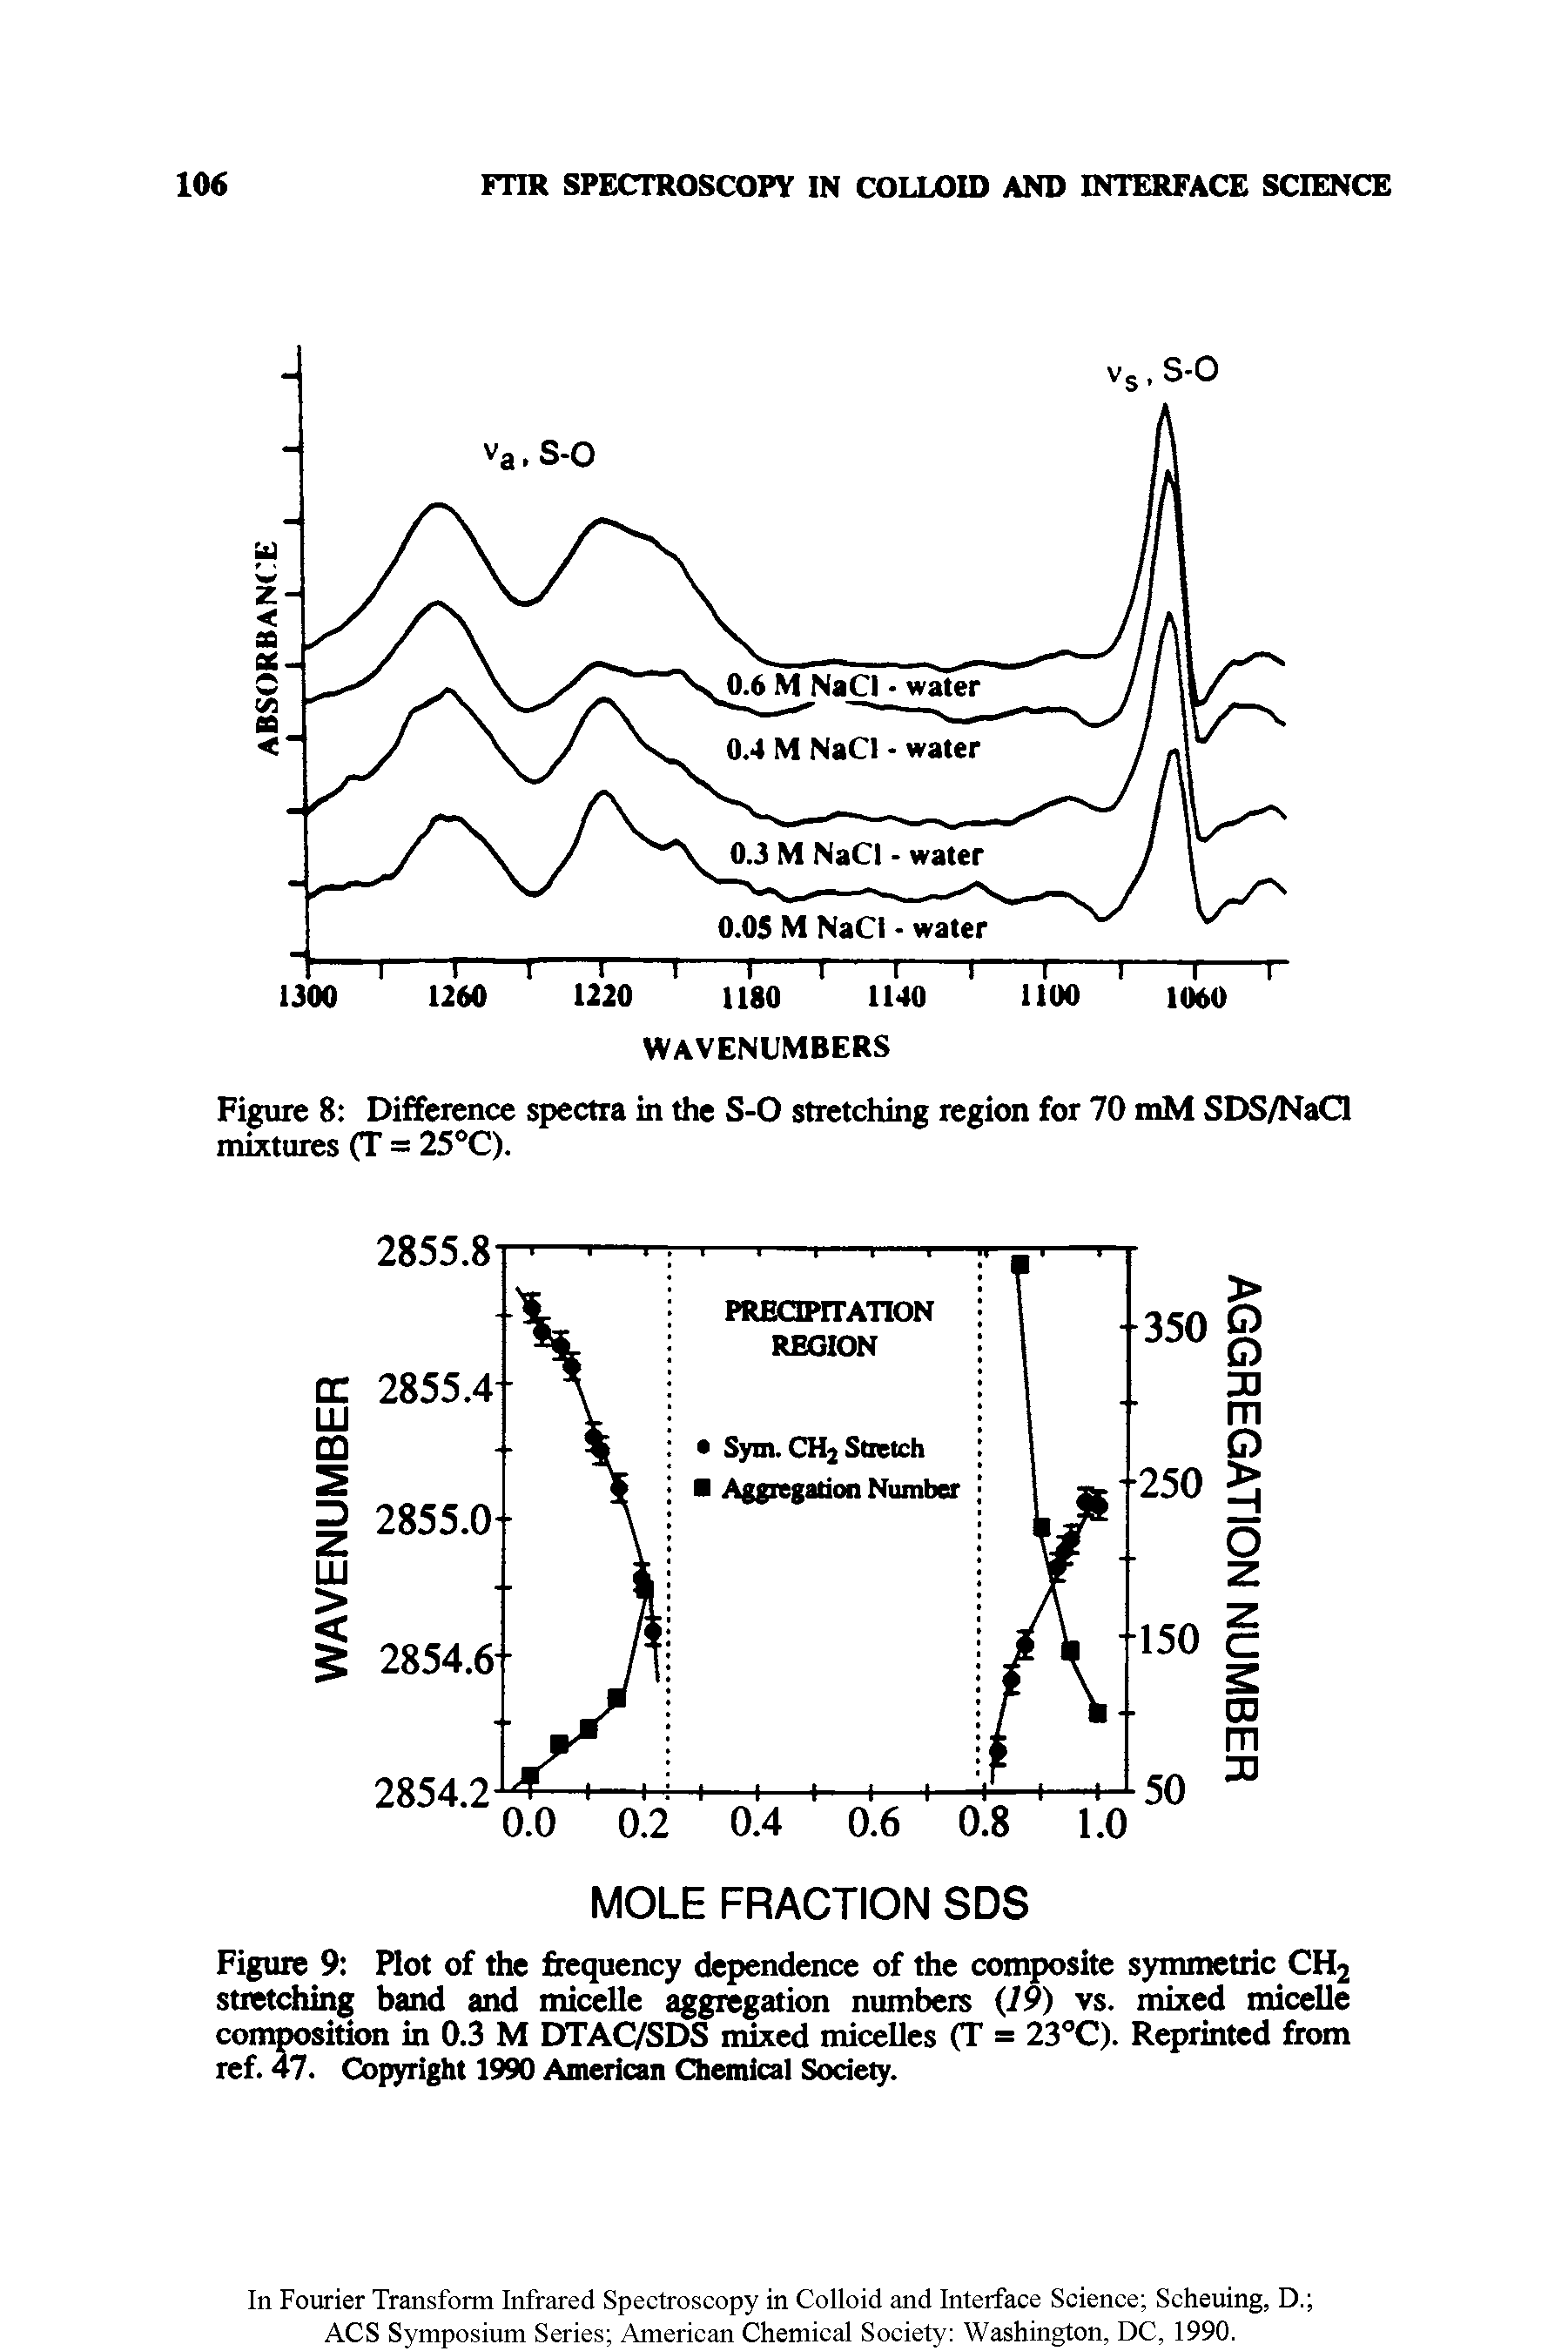 Figure 9 Plot of the frequency dependence of the composite symmetric CH2 stretching band and micelle aggregation numbers (19) vs. mixed micelle composition in 0.3 M DTAC/SDS mixed micelles (T = 23°C). Reprinted from ref. 47. Copyright 1990 American Chemical Society.